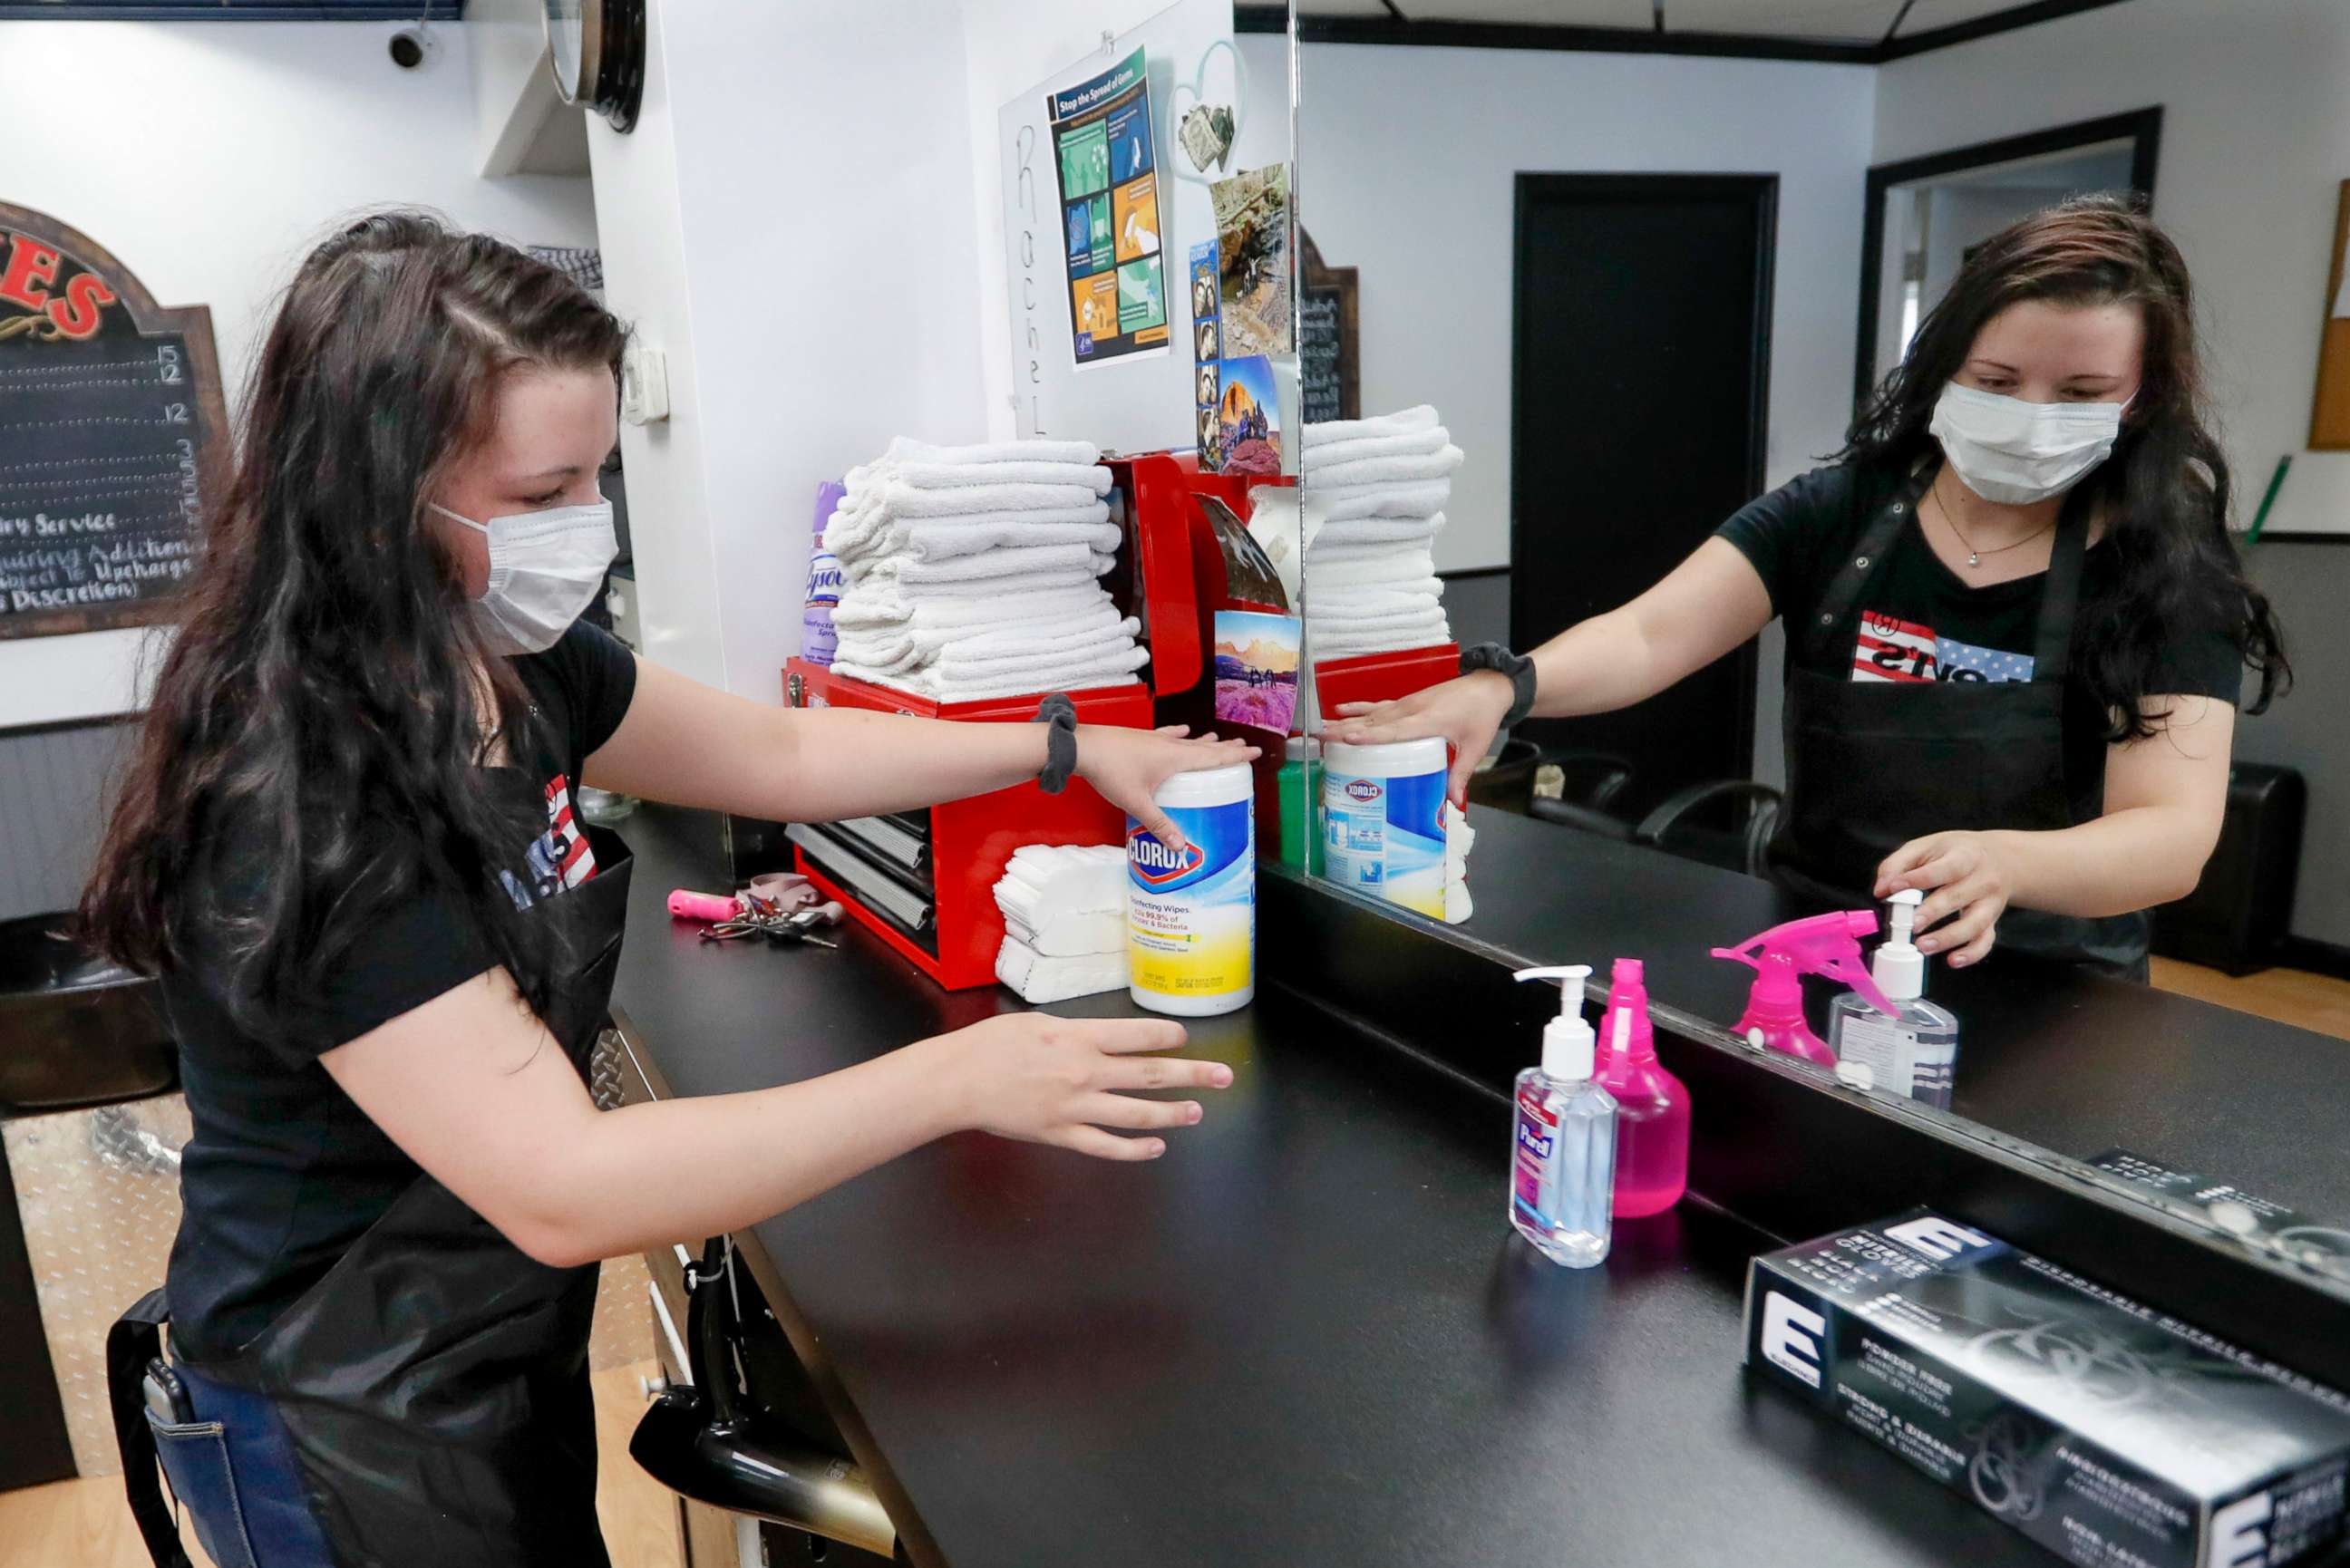 PHOTO: Stylist Kayla Addink arranges items in her workspace Thursday, June 4, 2020, as she prepares for her first day back on the job at the West View Barber Shop when most of southwest Pennsylvania loosens COVID-19 restrictions on Friday.